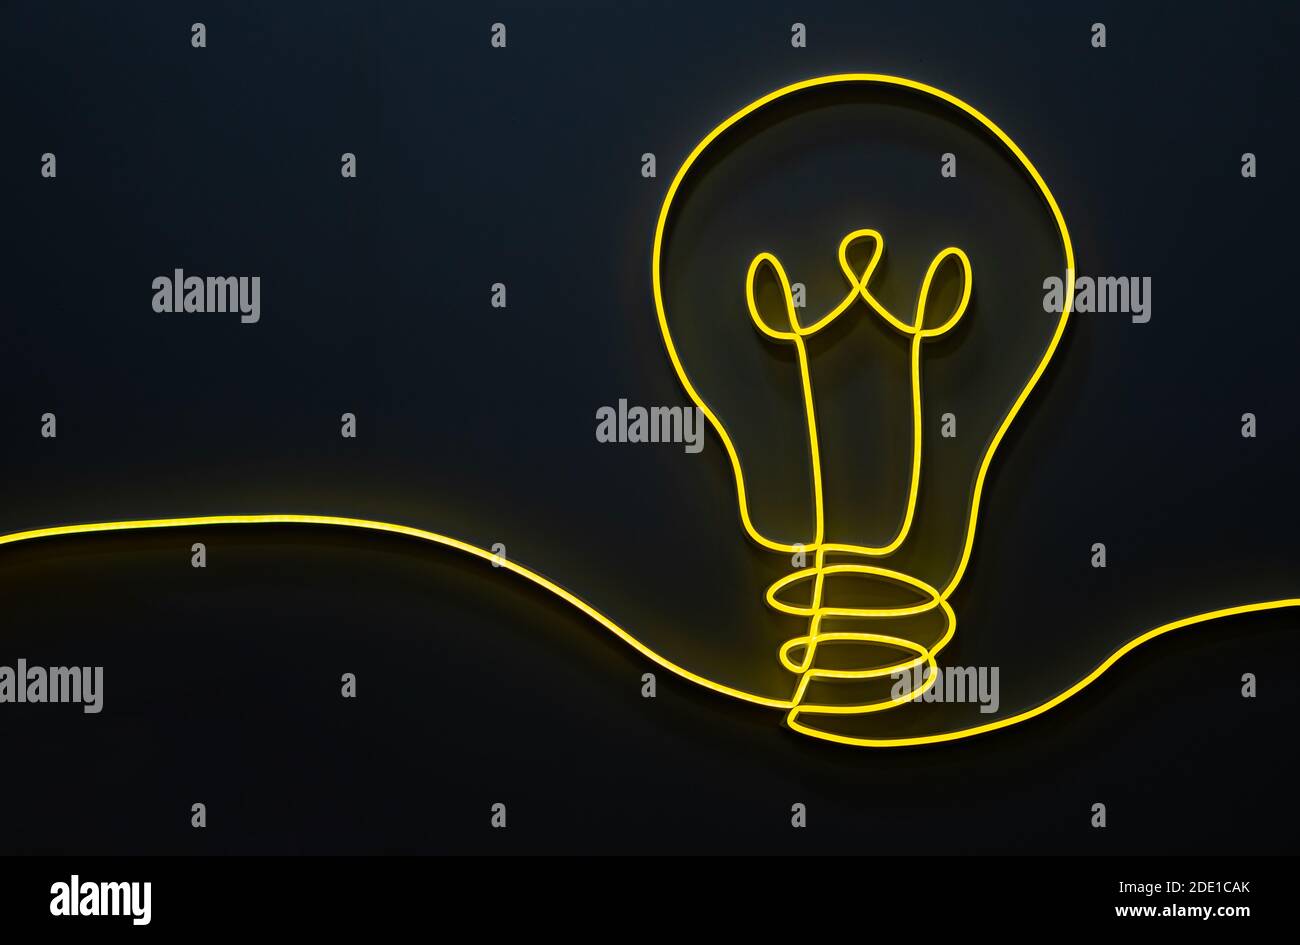 Yellow light bulb shape decoration design made from led light line on a dark background Stock Photo